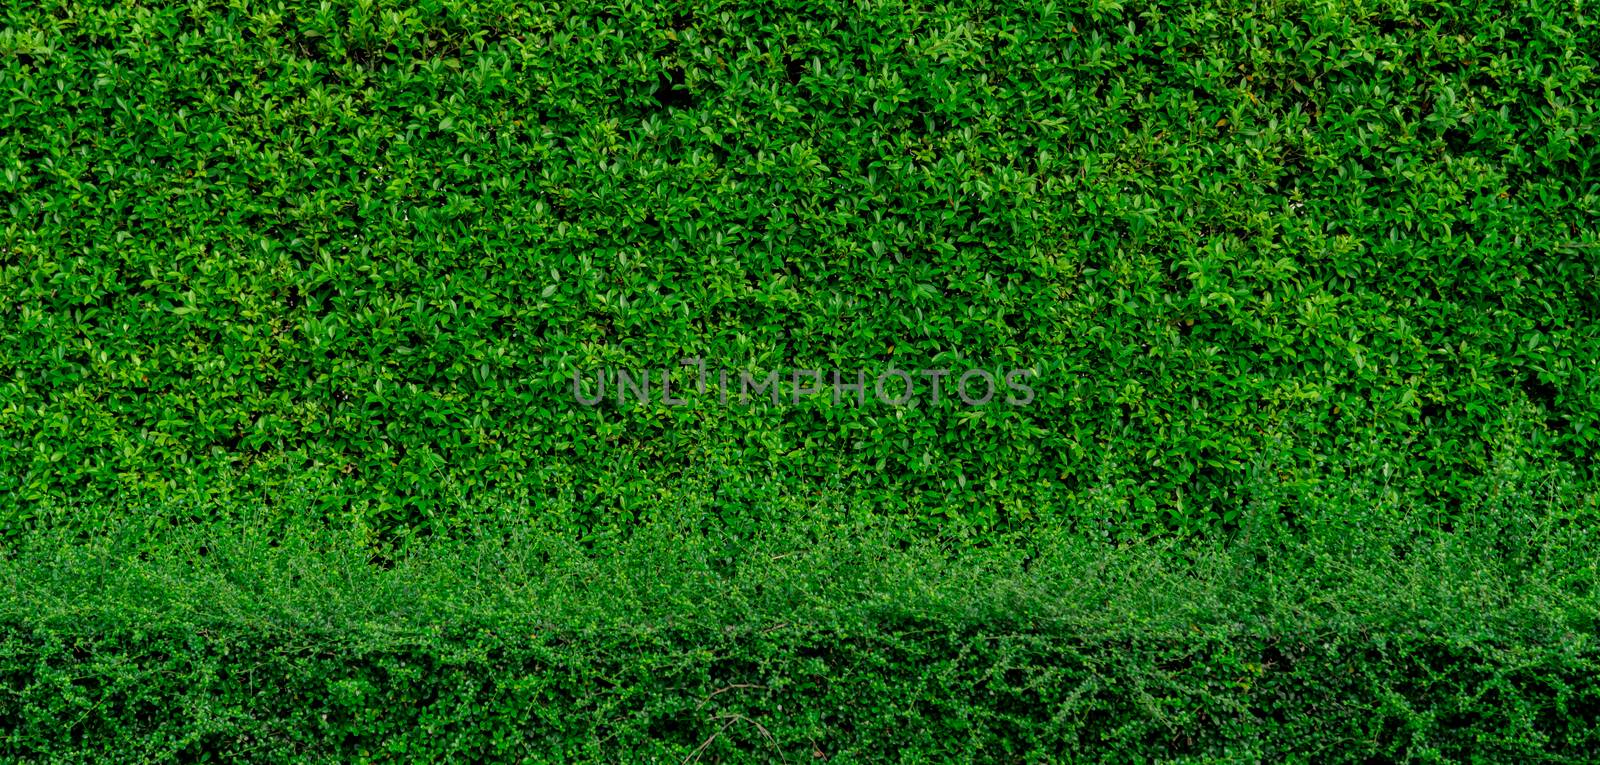 Small green leaves texture background with beautiful pattern. Clean environment. Ornamental plant in the garden. Eco wall. Organic natural background. Many leaves reduce dust in air. Tropical garden.